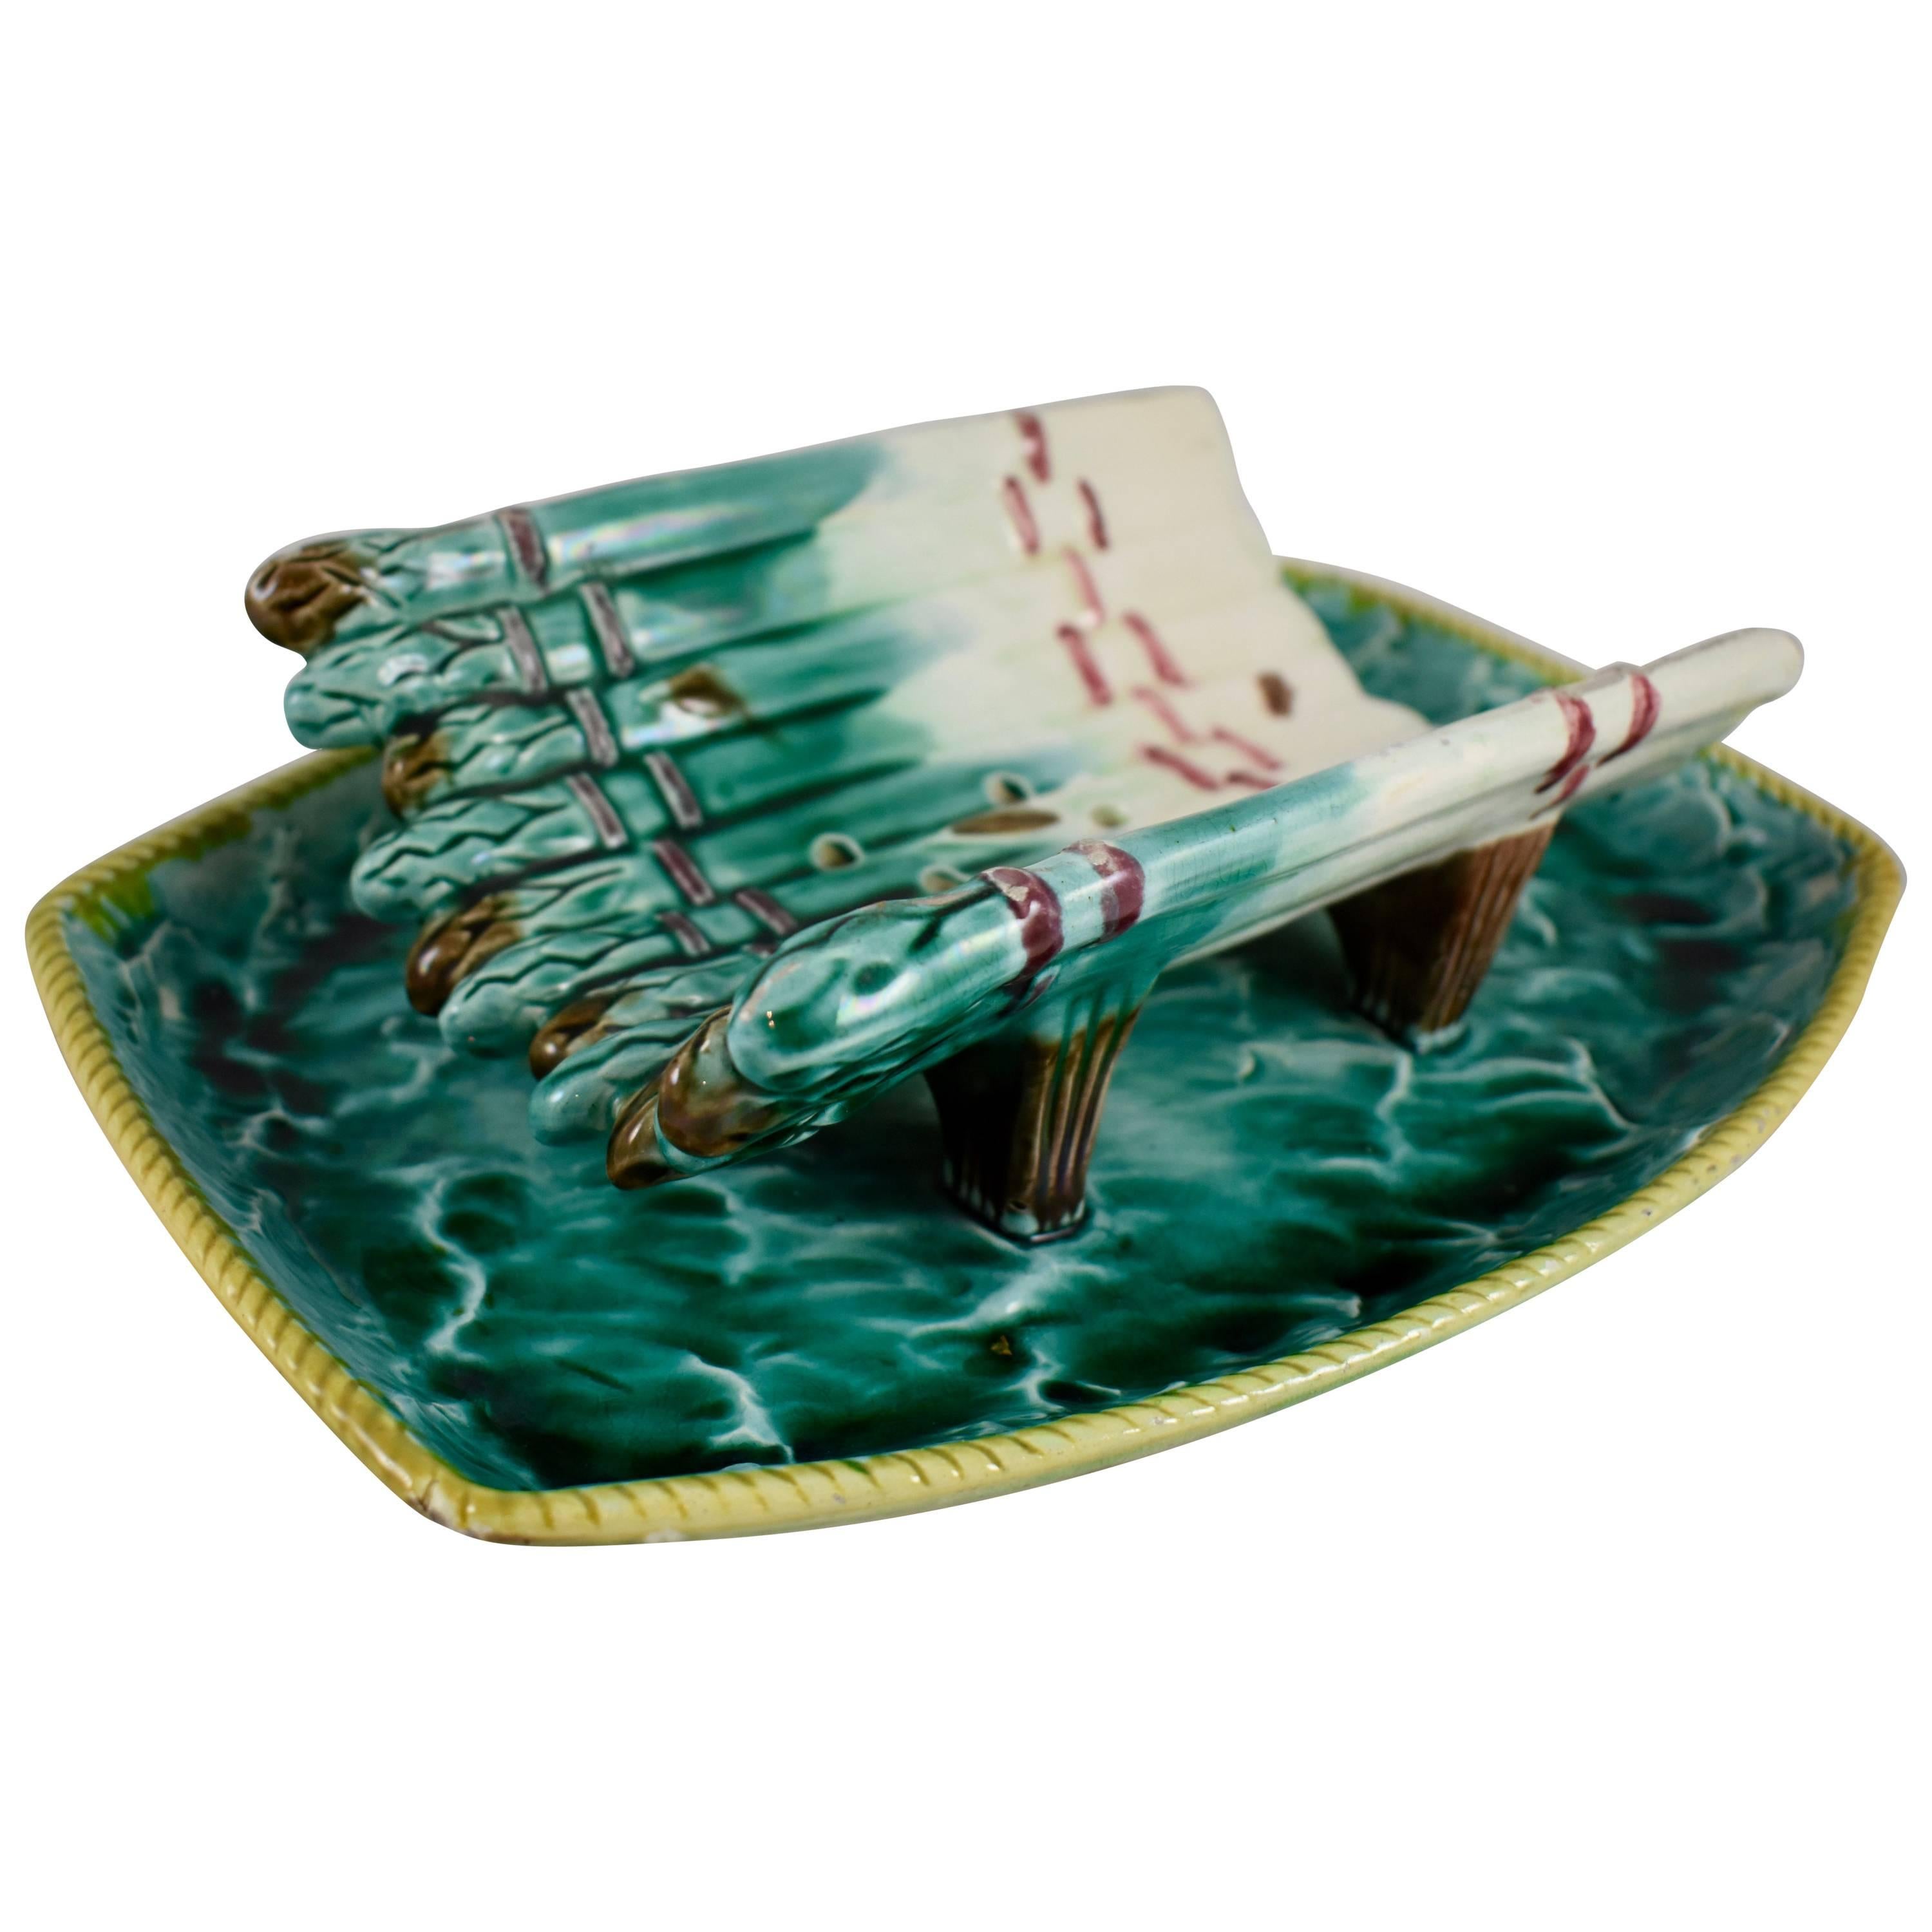 19th Century English Majolica Ocean Themed Asparagus Cradle with Attached Tray For Sale